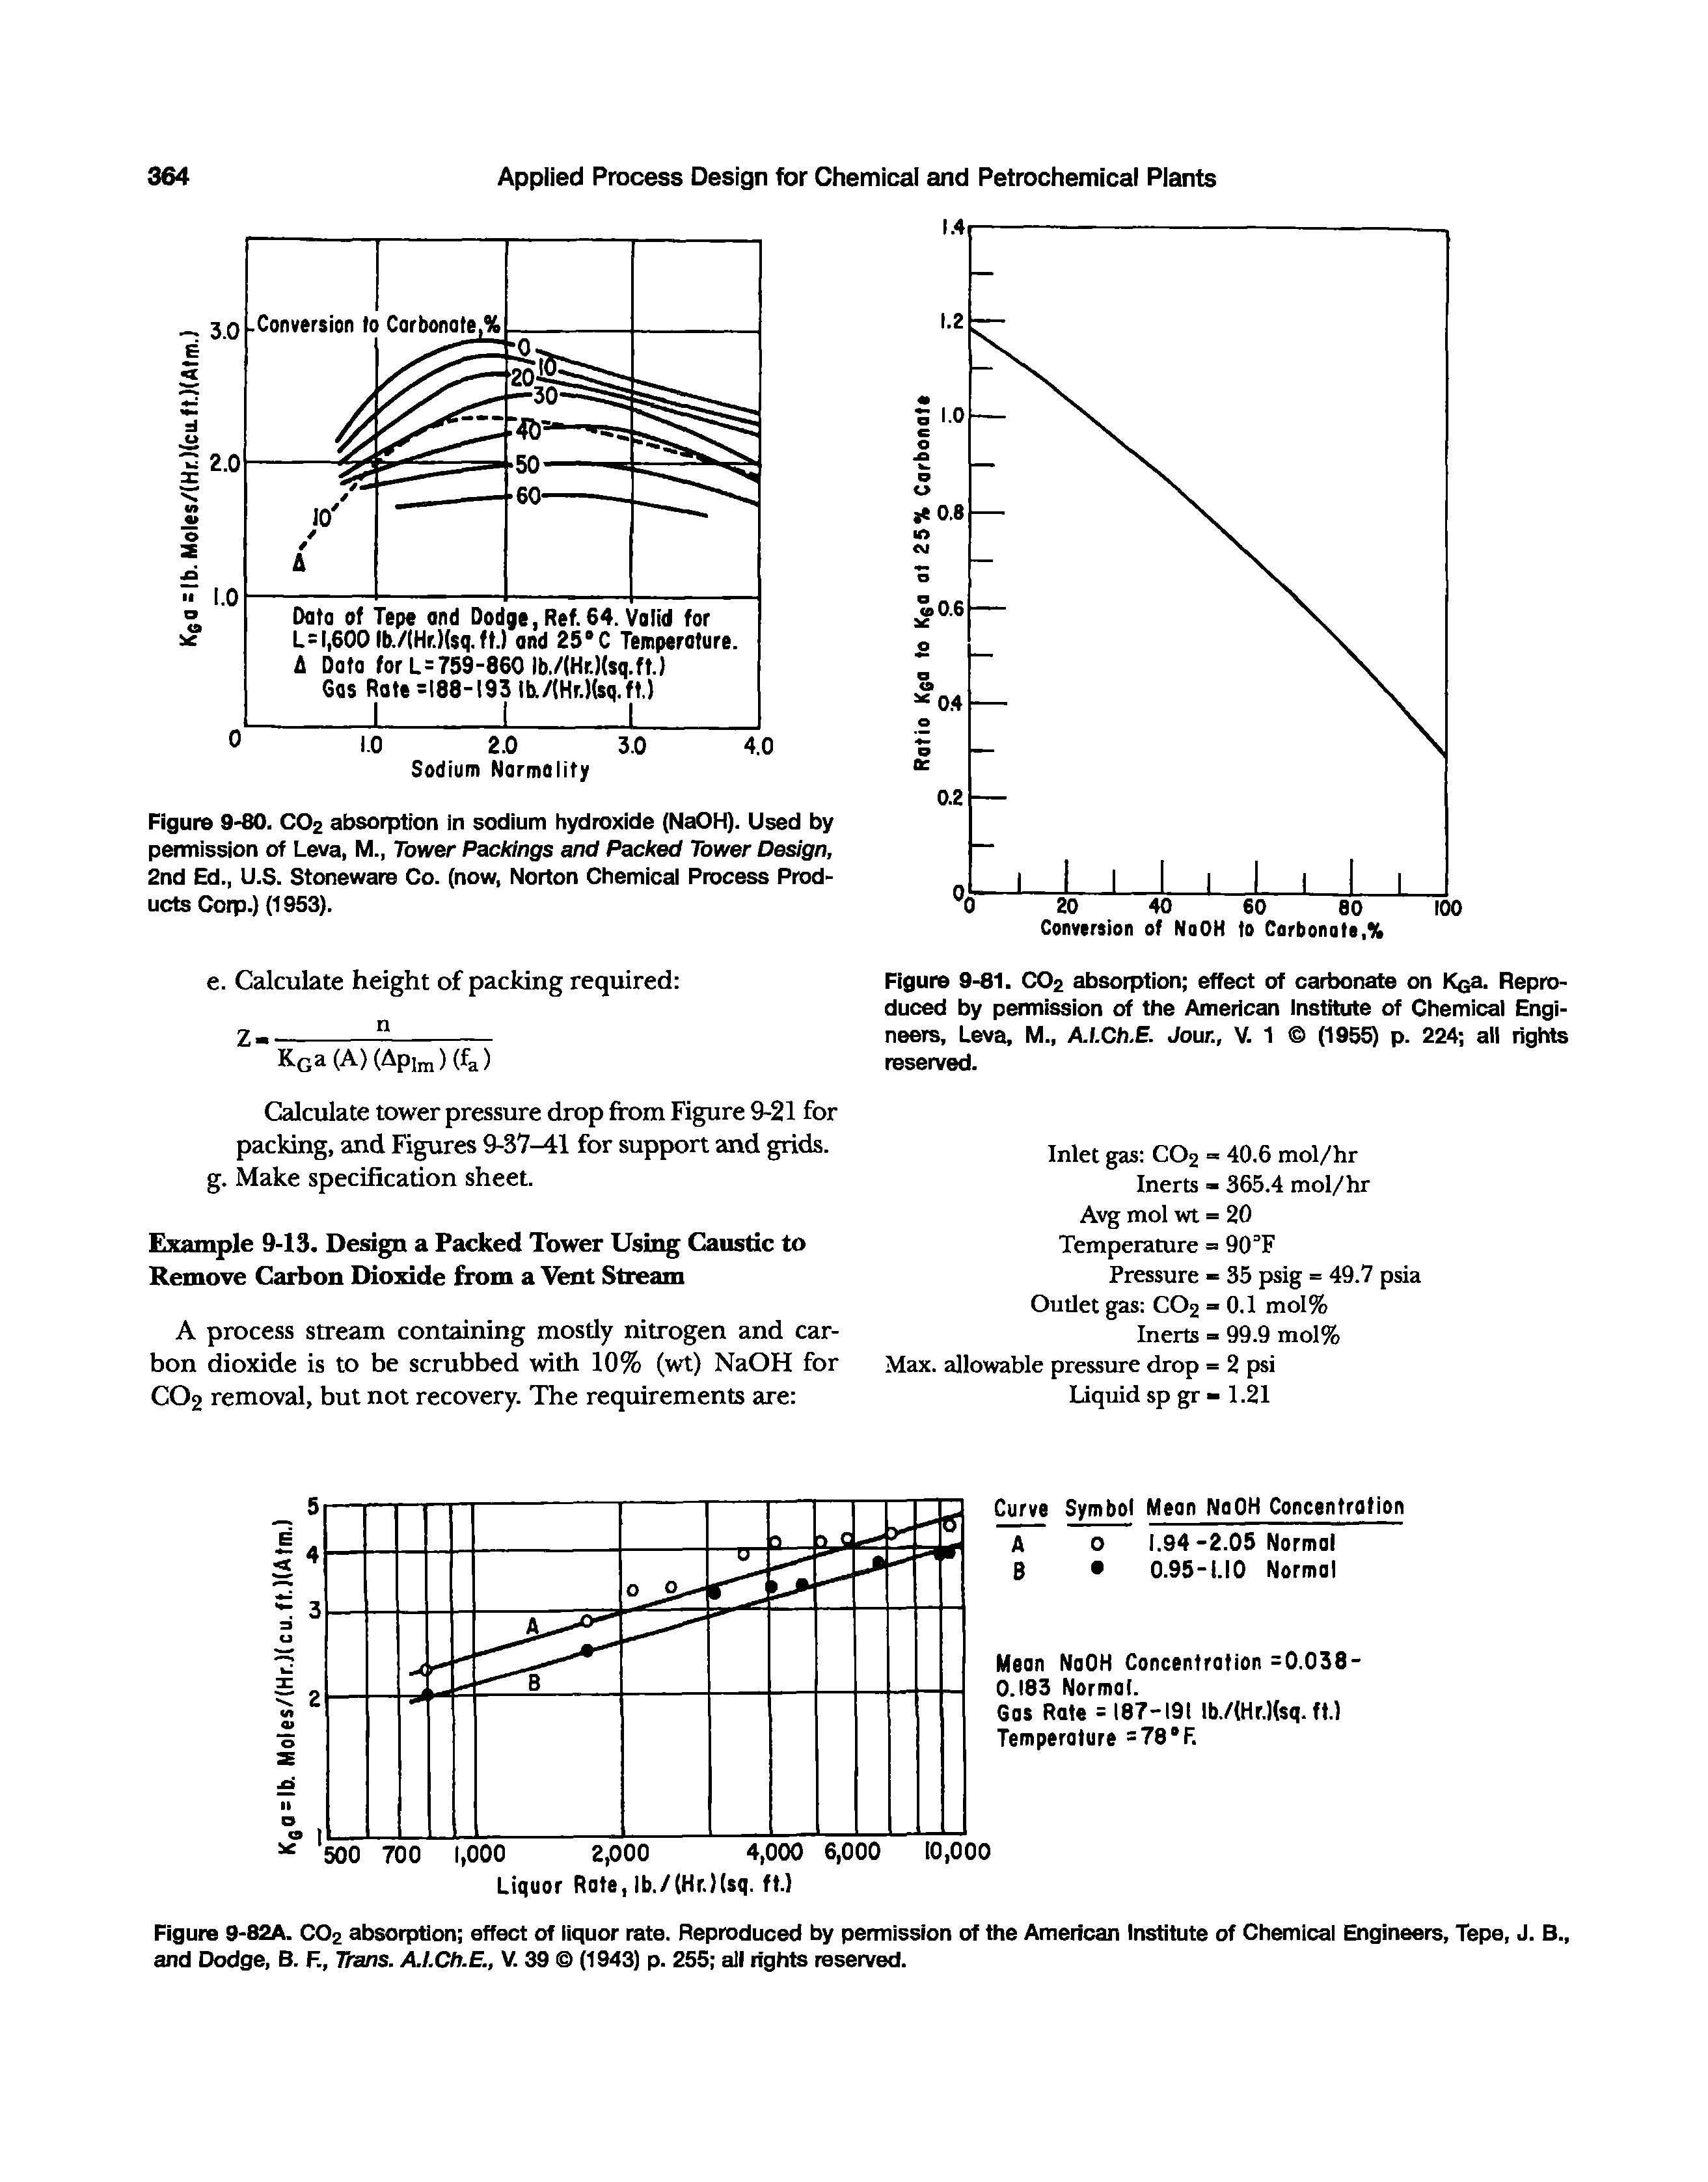 Figure 9-80. CO2 absorption in sodium hydroxide (NaOH). Used by permission of Leva, M., Tower Packings and Packed Tower Design, 2nd Ed., U.S. Stoneware Co. (now, Norton Chemical Process Products Coip.) (1953).